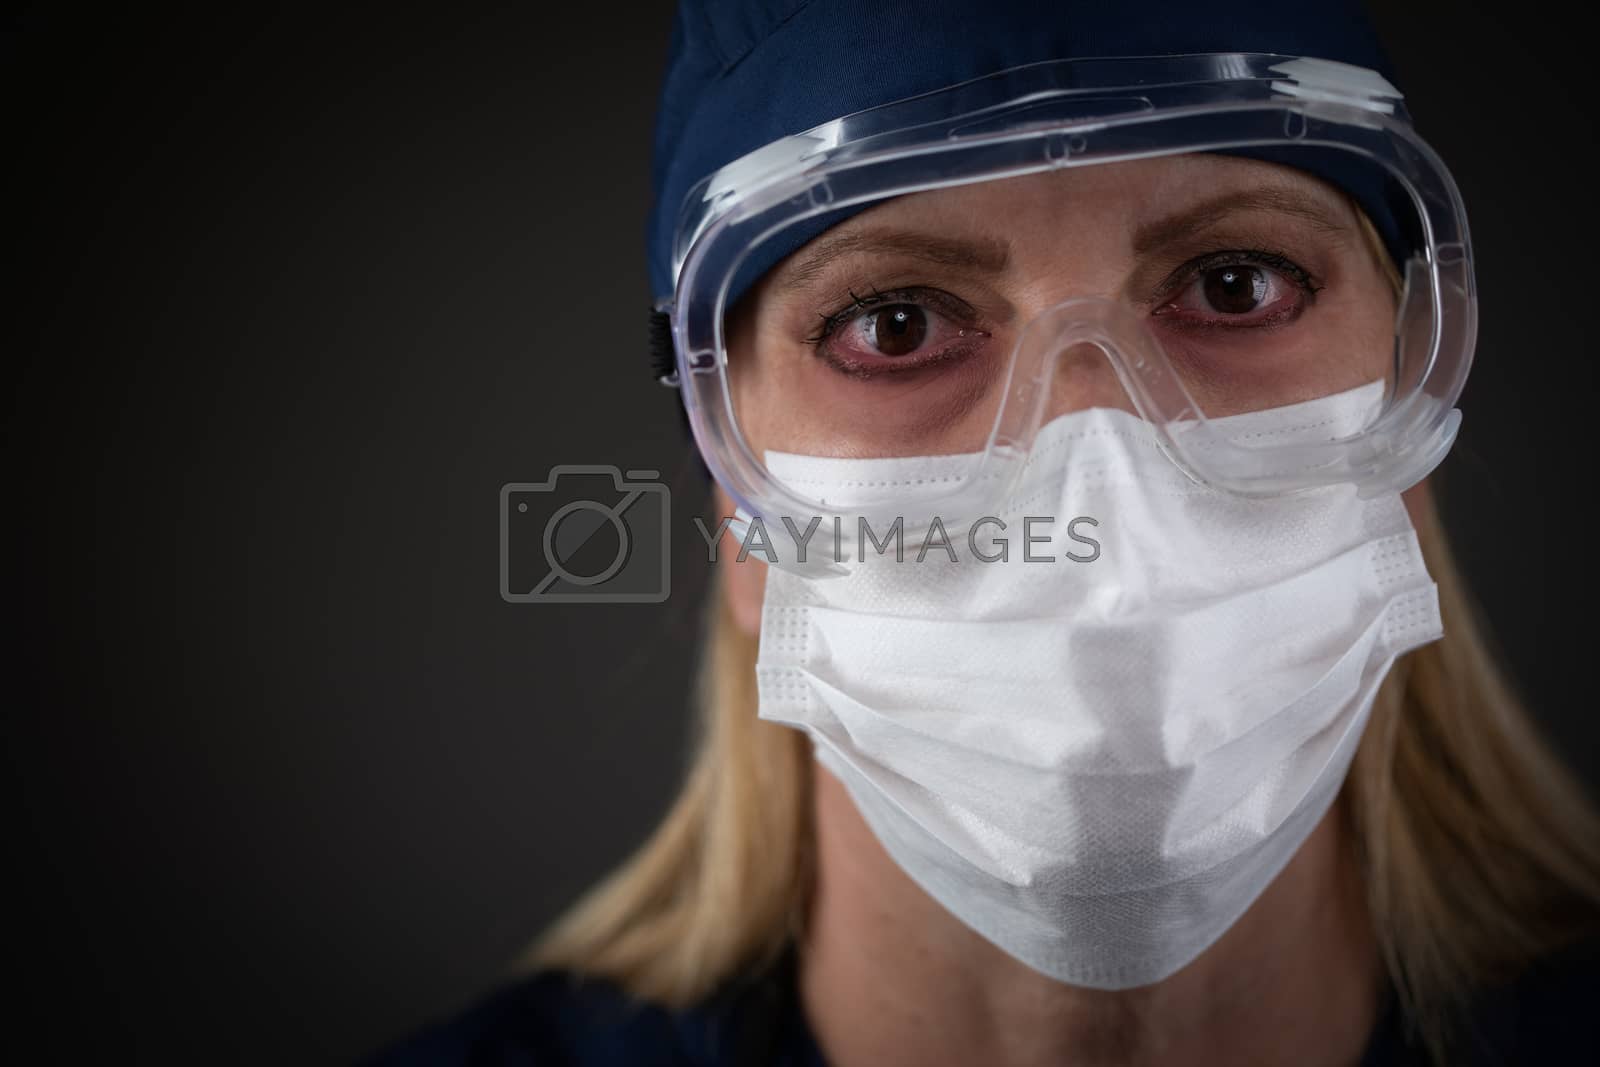 Royalty free image of Female Medical Worker Wearing Protective Gear Showing Symptoms of Disease. by Feverpitched